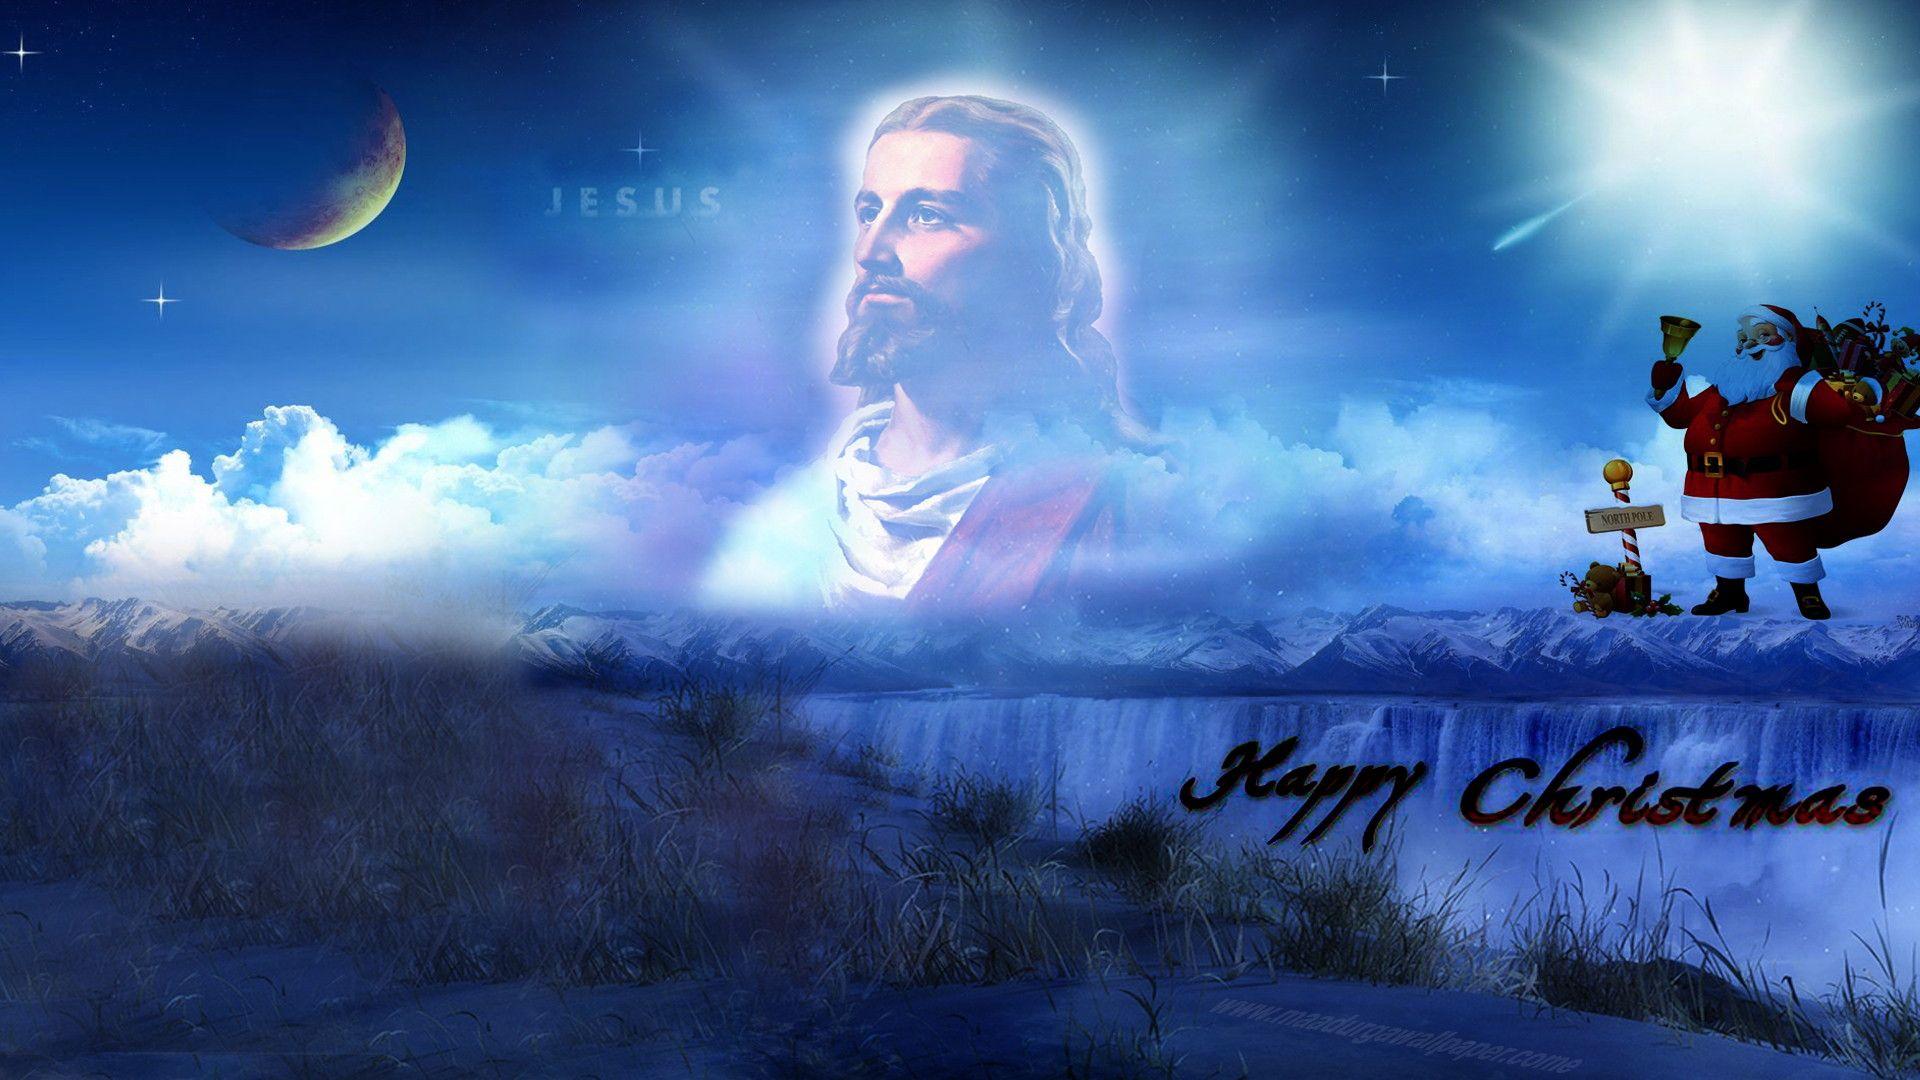 Lord Jesus Wallpaper Android Apps on Google Play 1920×1080 Beautiful Jesus Wallpaper (41 Wallpaper). Adorable. Jesus wallpaper, Jesus image, Christmas jesus